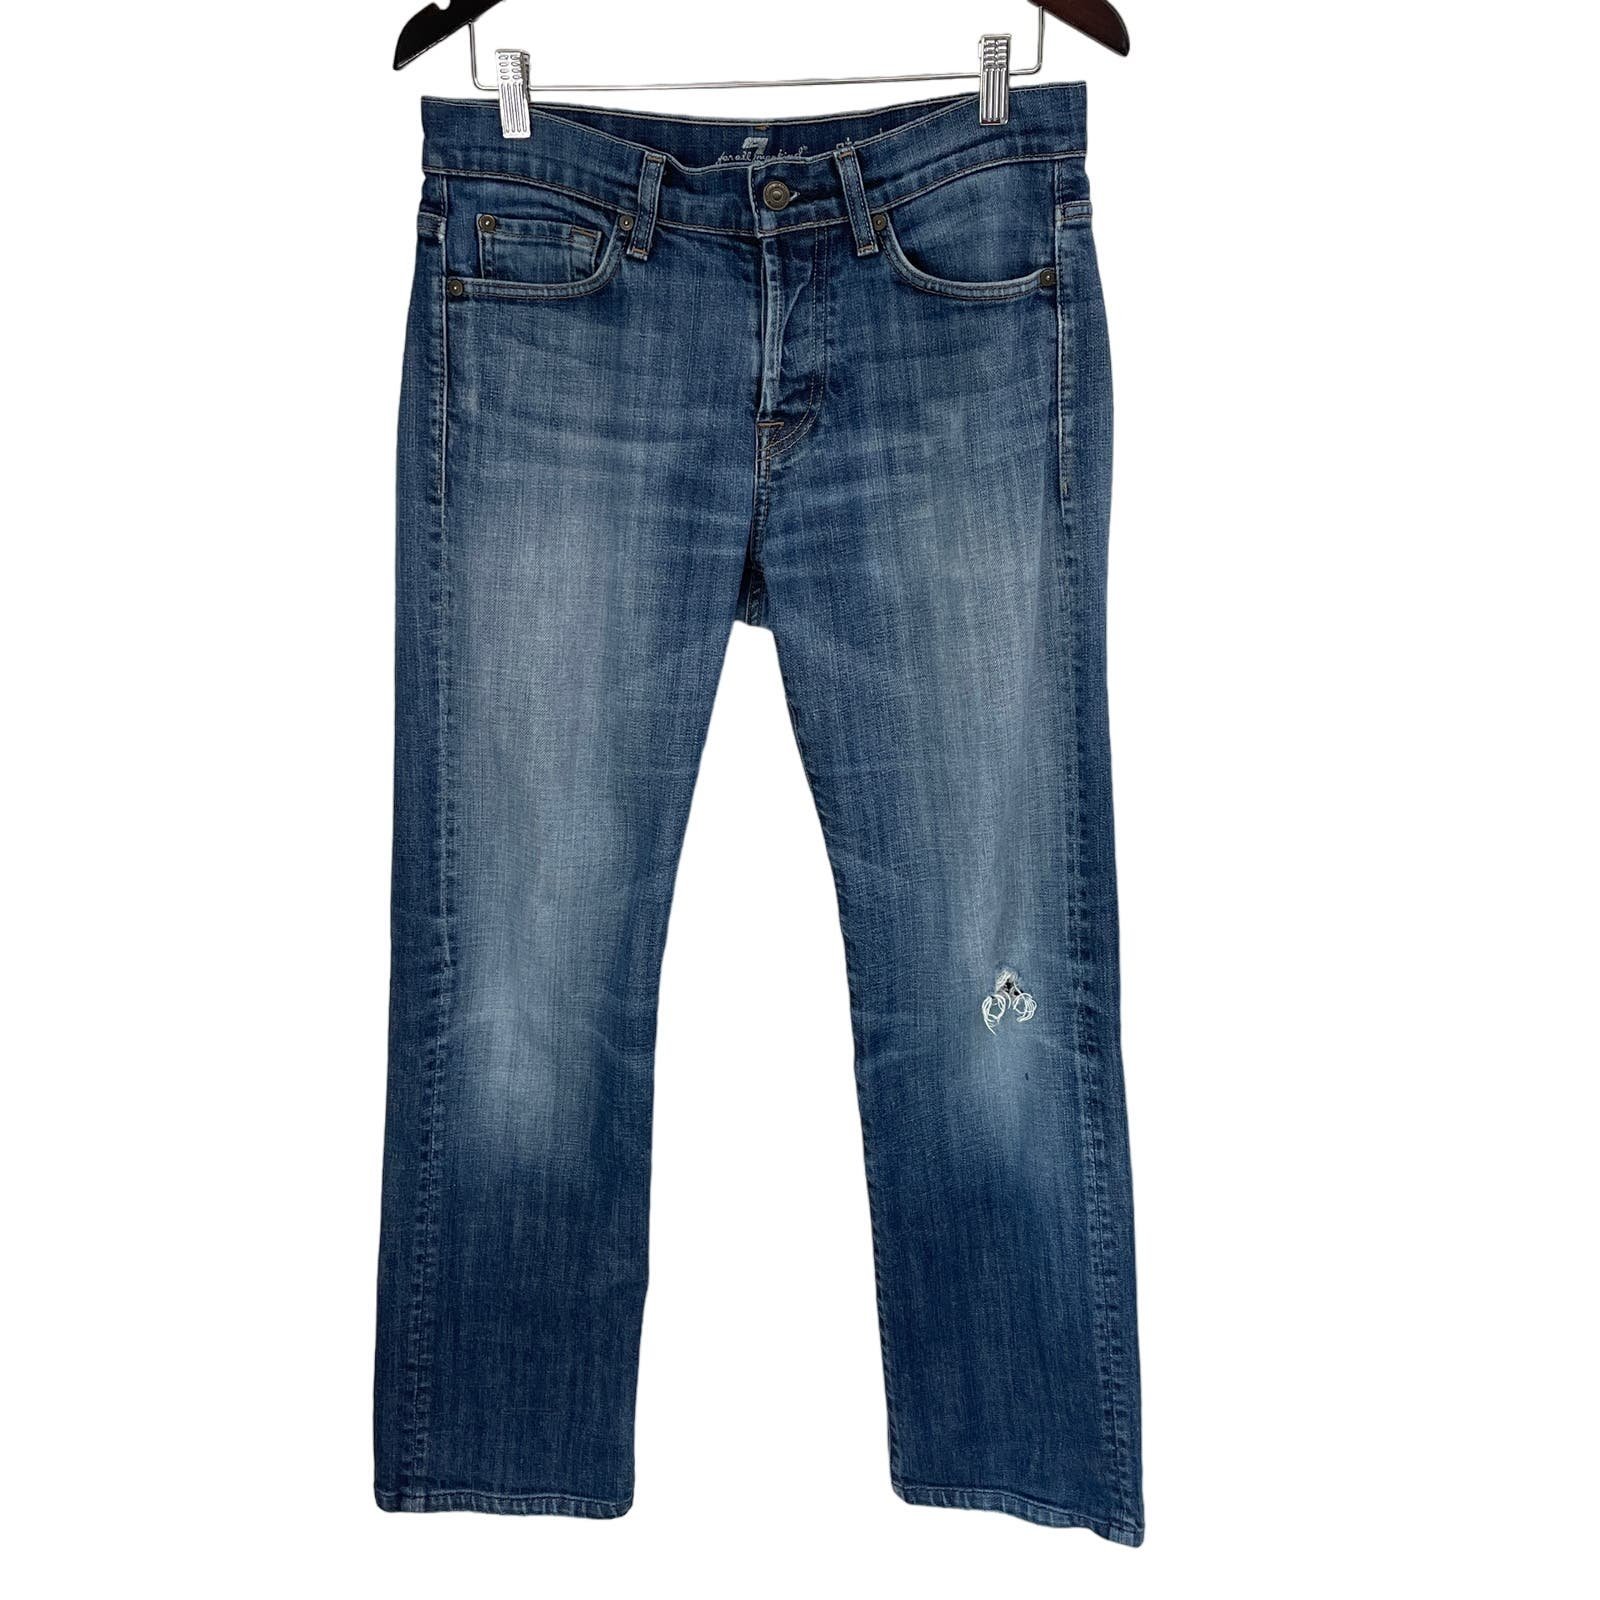 Buy 7 FOR ALL MANKIND Standard Straight Distressed Butt